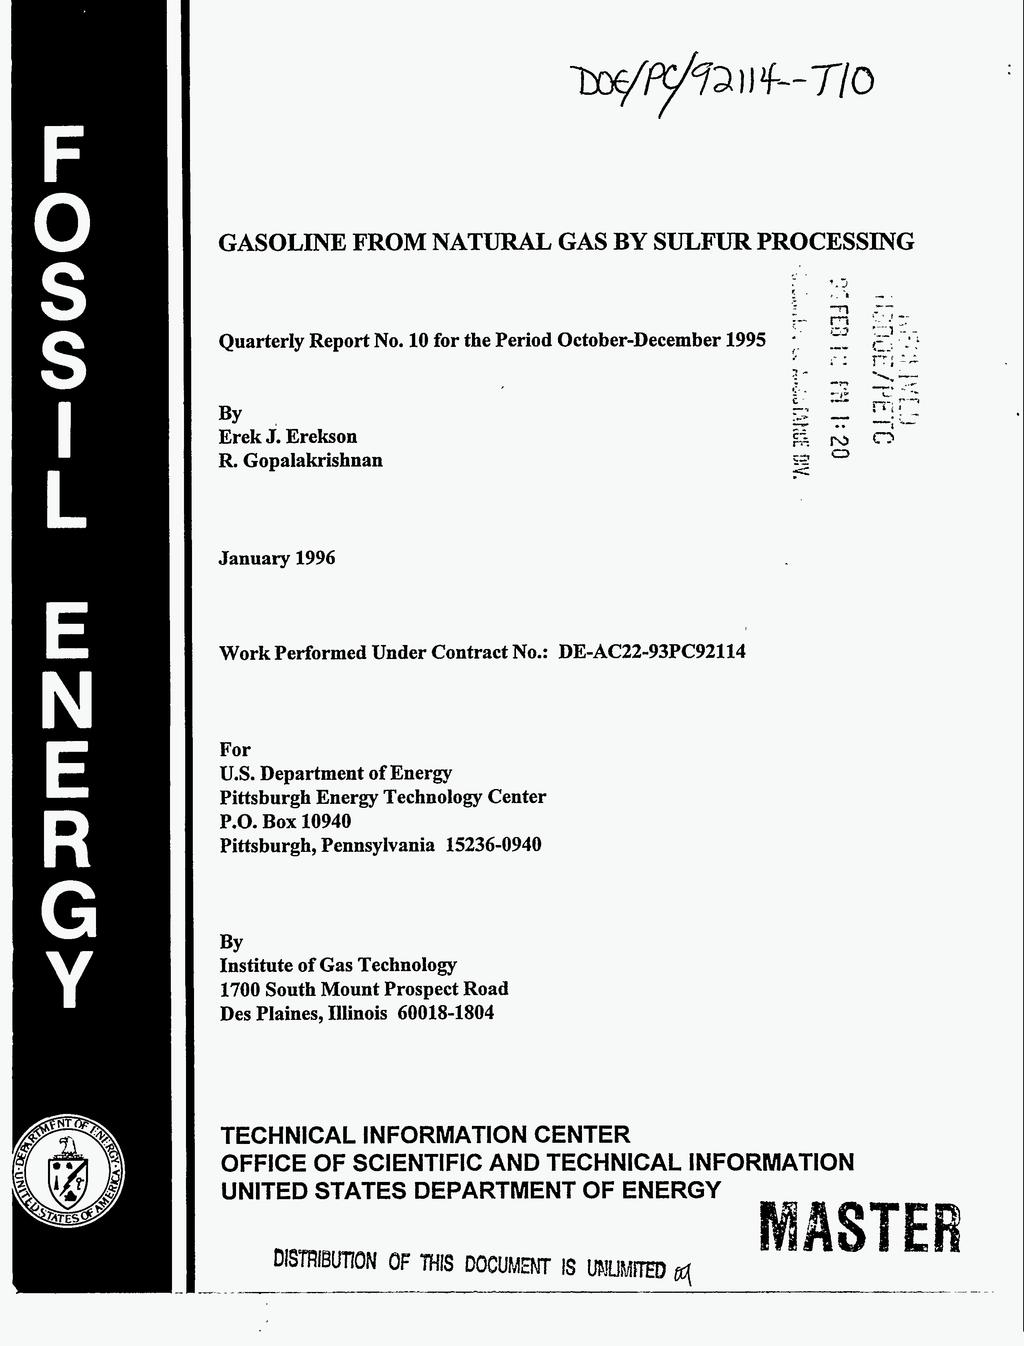 GASOLINE FROM NATURAL GAS BY SULFUR PROCESSING BY Erek J. Erekson R. Gopalakrishnan January 1996 Work Performed Under Contract No.: DE-AC22-93PC92114 For U.S. Department of Energy Pittsburgh Energy Technology Center P.